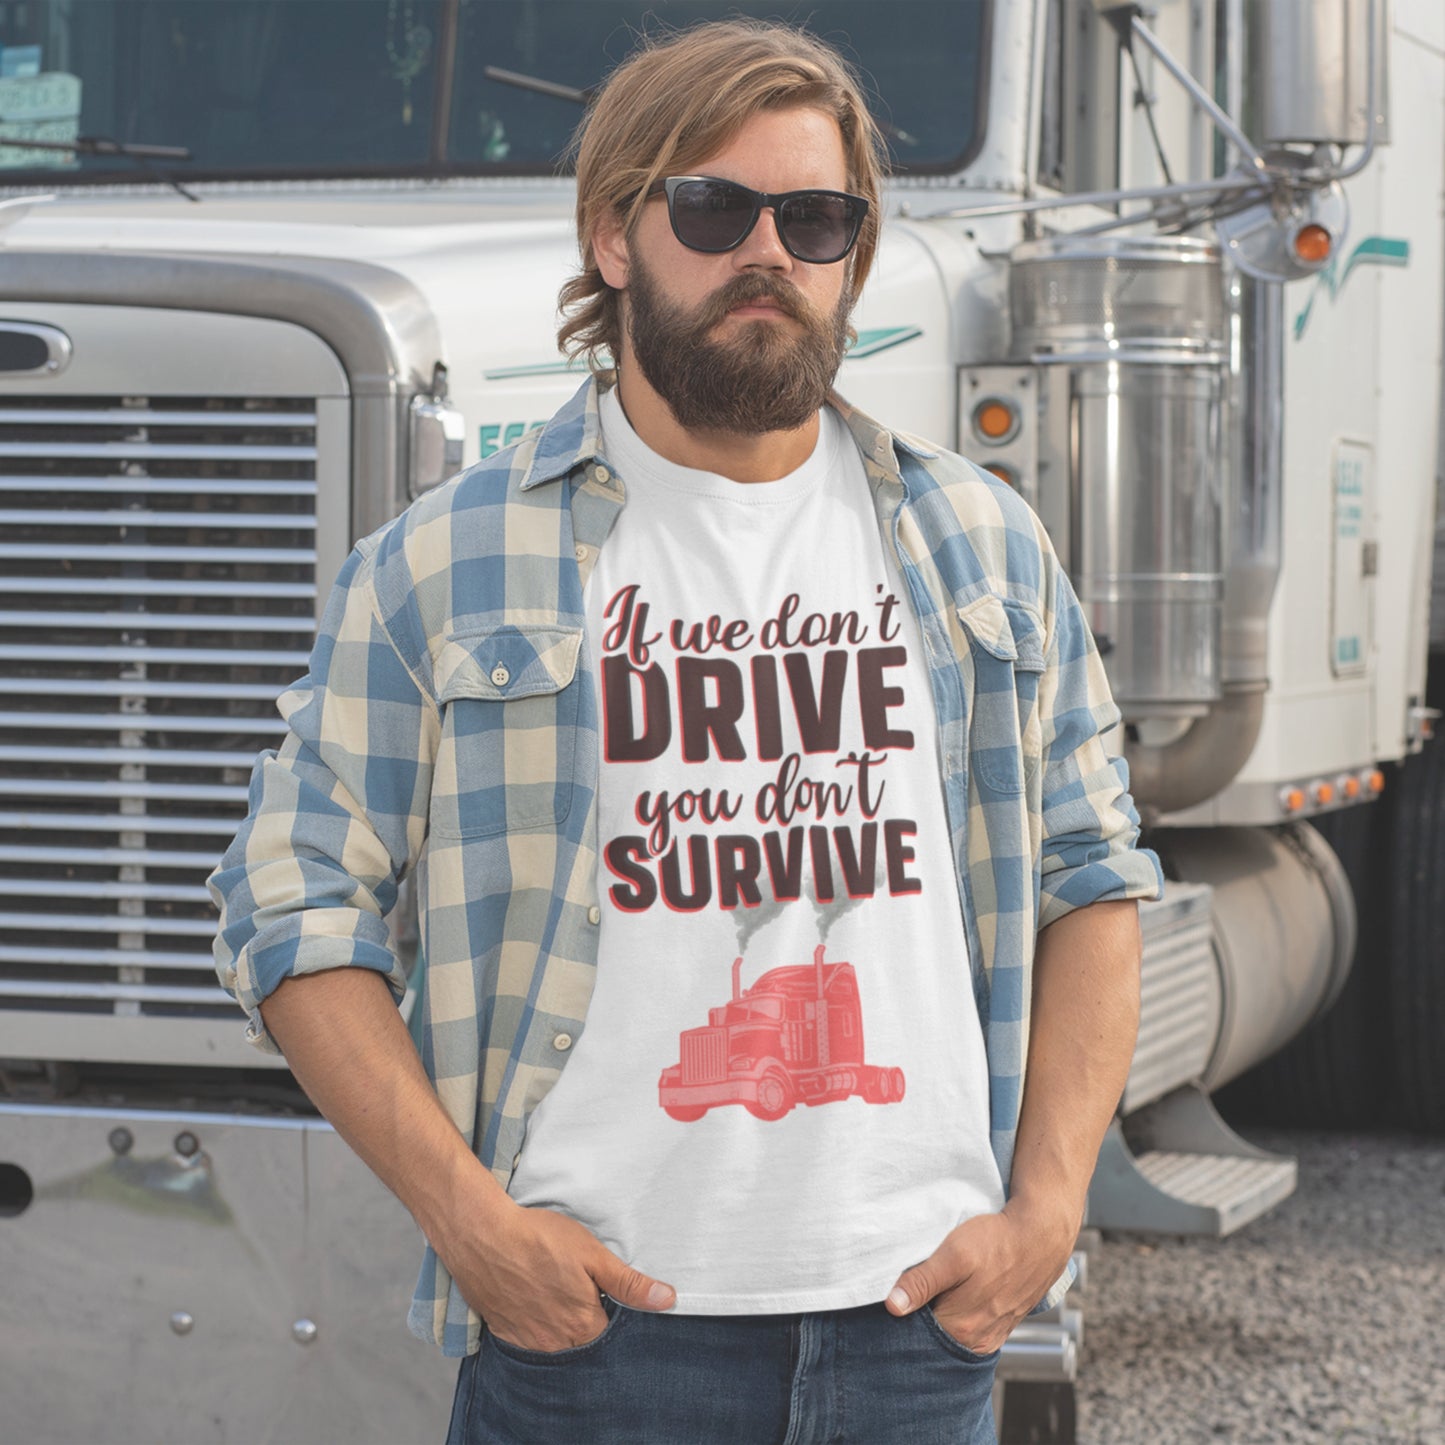 If we don&#39;t drive you don&#39;t survive trucker shirt, semi truck